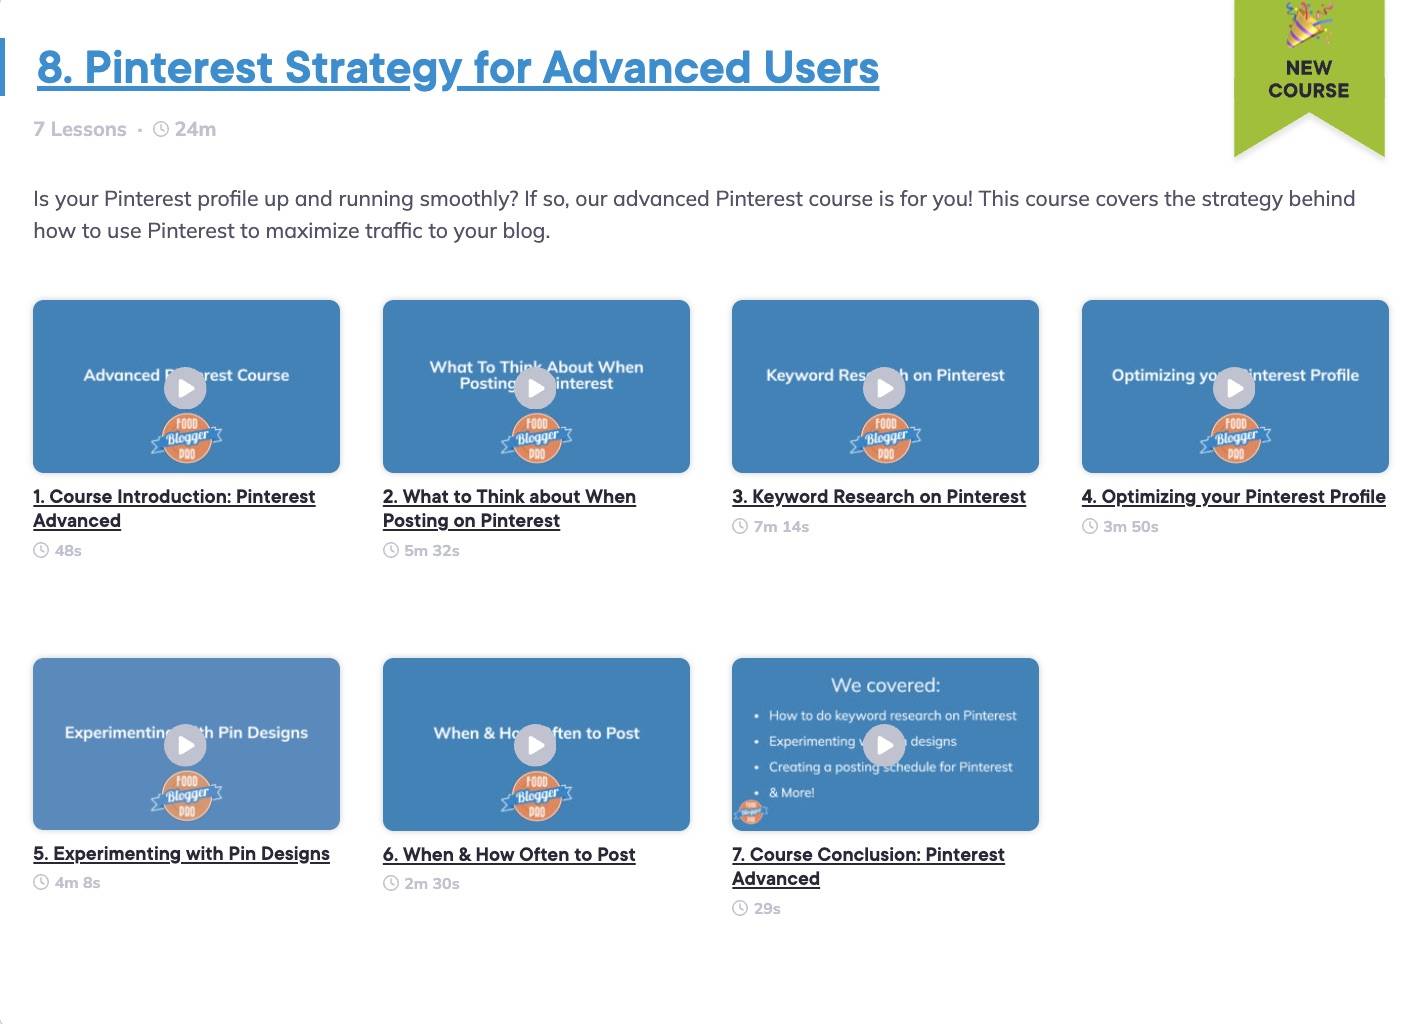 Overview of Pinterest Strategy for Advanced Users course that shows the individual lessons.